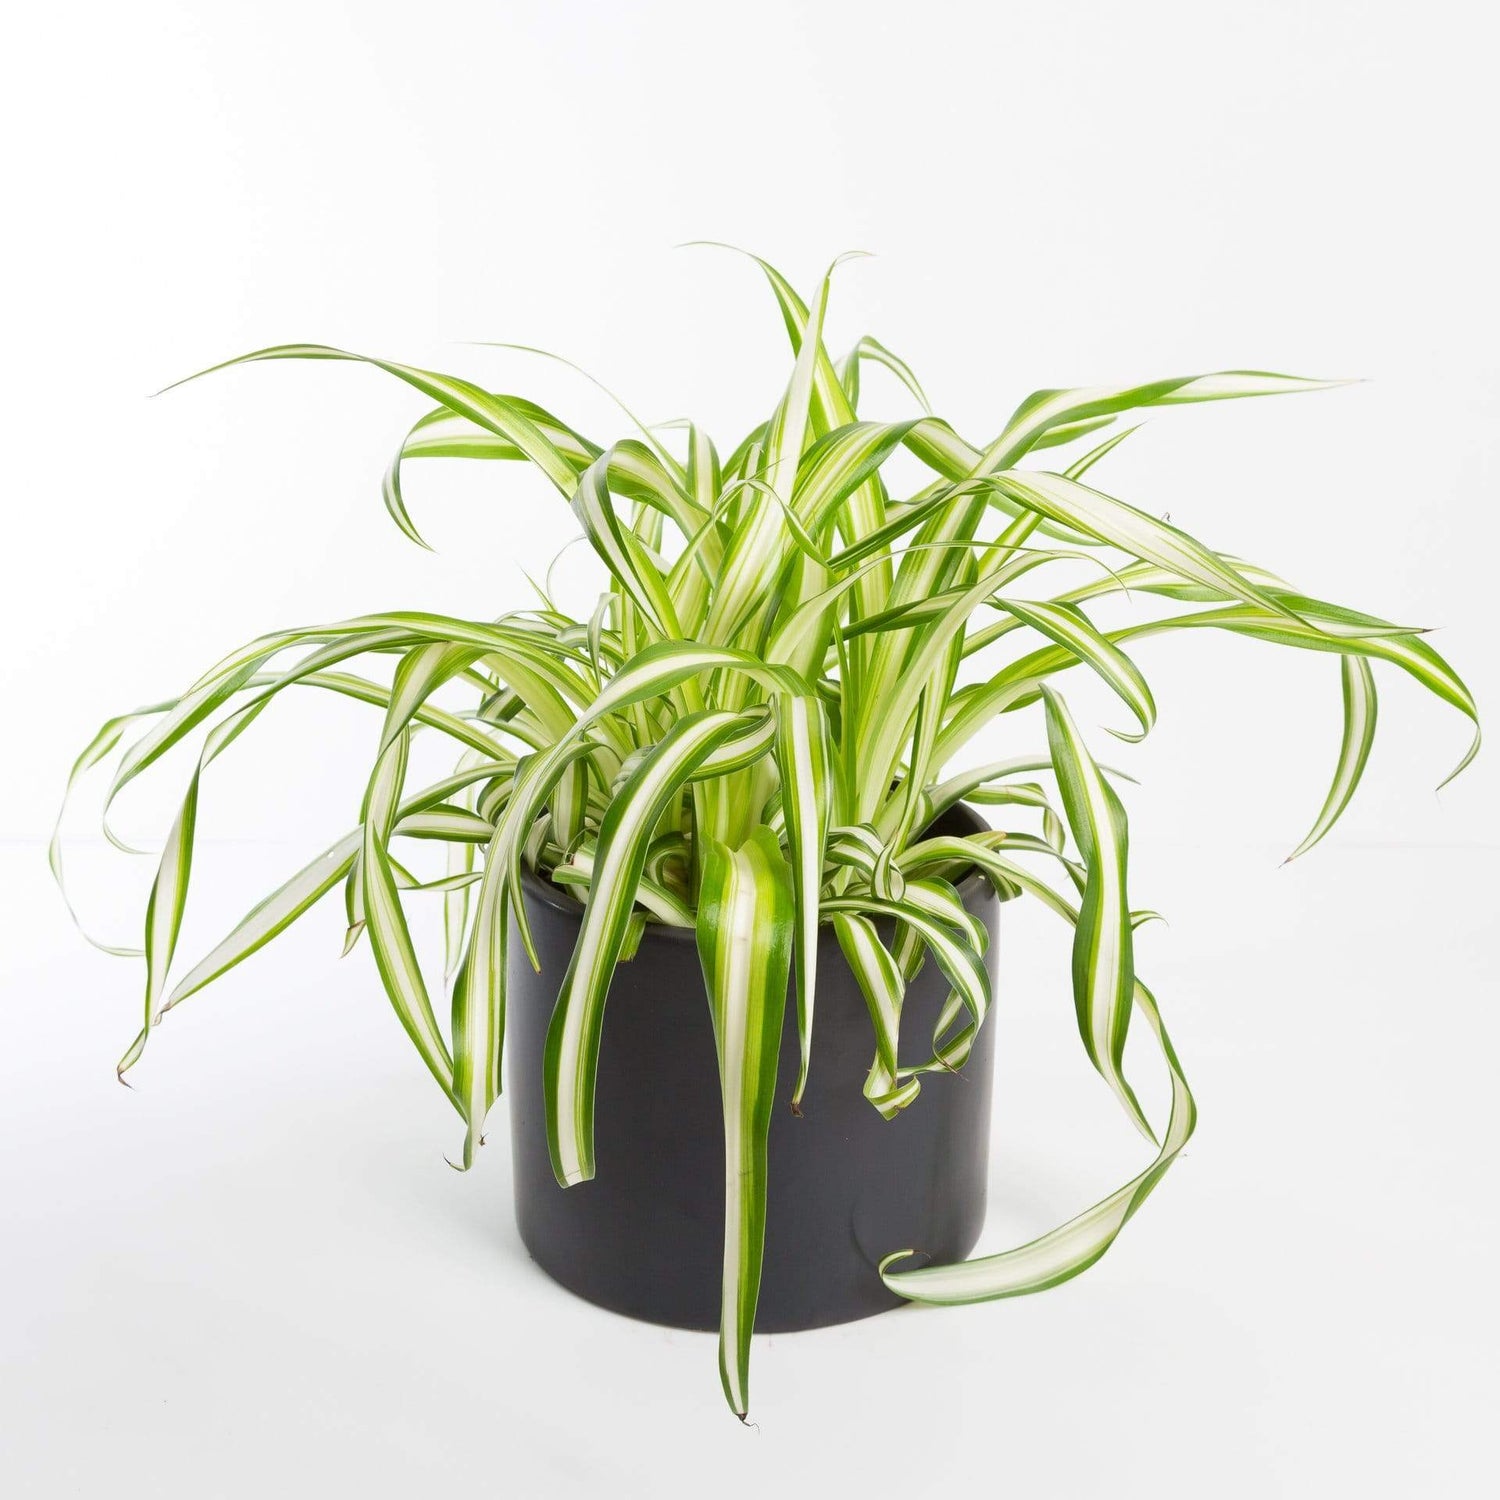 Urban Sprouts Plant 8" in nursery pot Spider Plant 'Variegated'